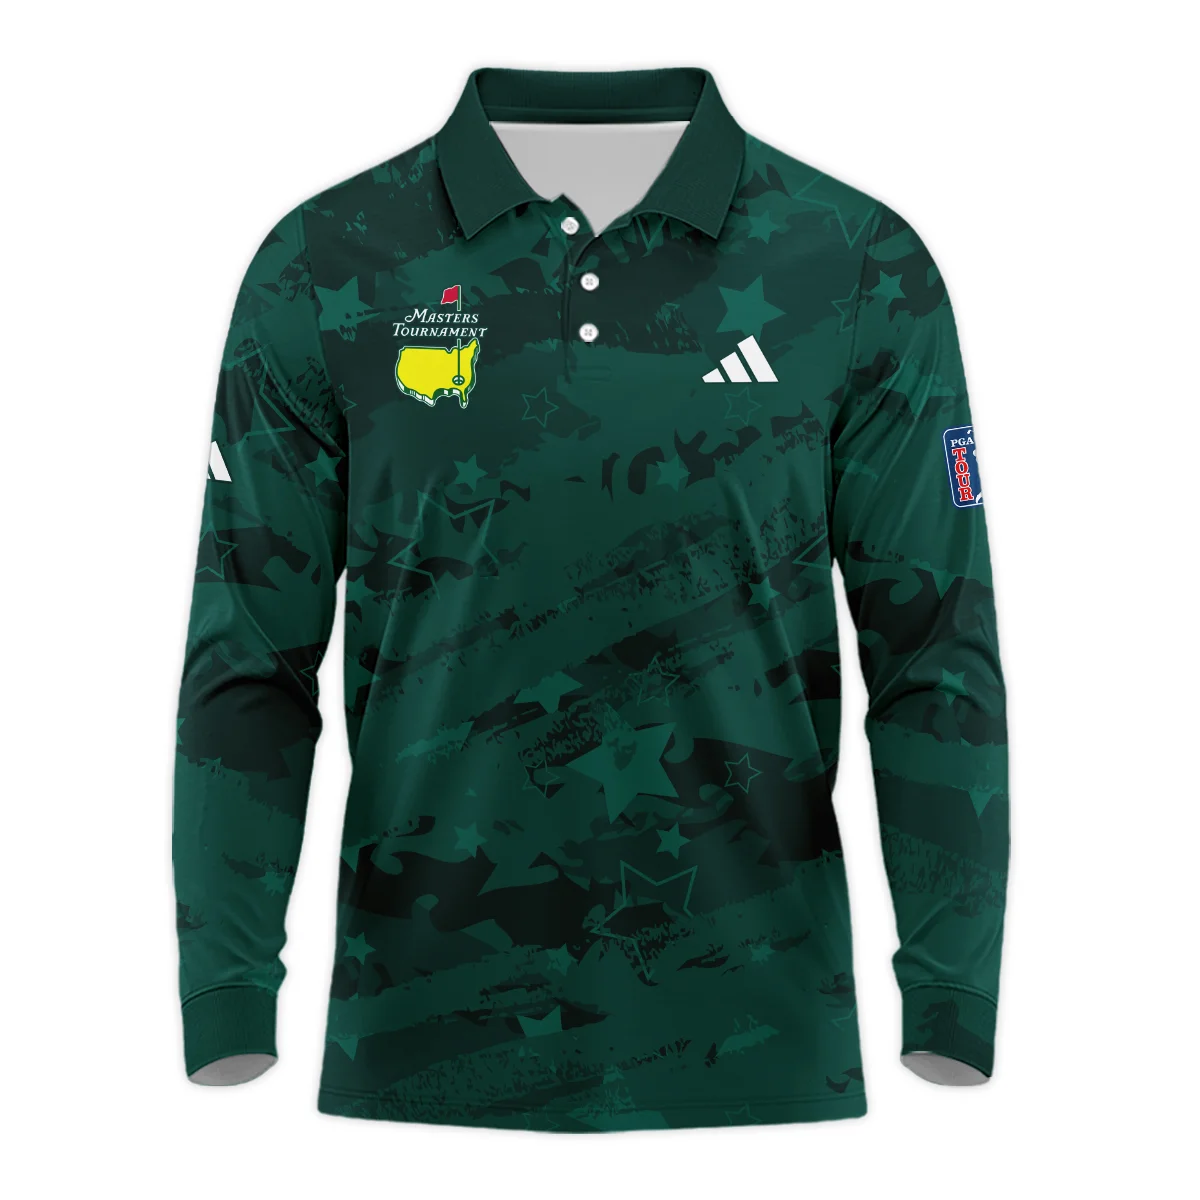 Dark Green Stars Pattern Grunge Background Masters Tournament Adidas Long Polo Shirt Style Classic Long Polo Shirt For Men